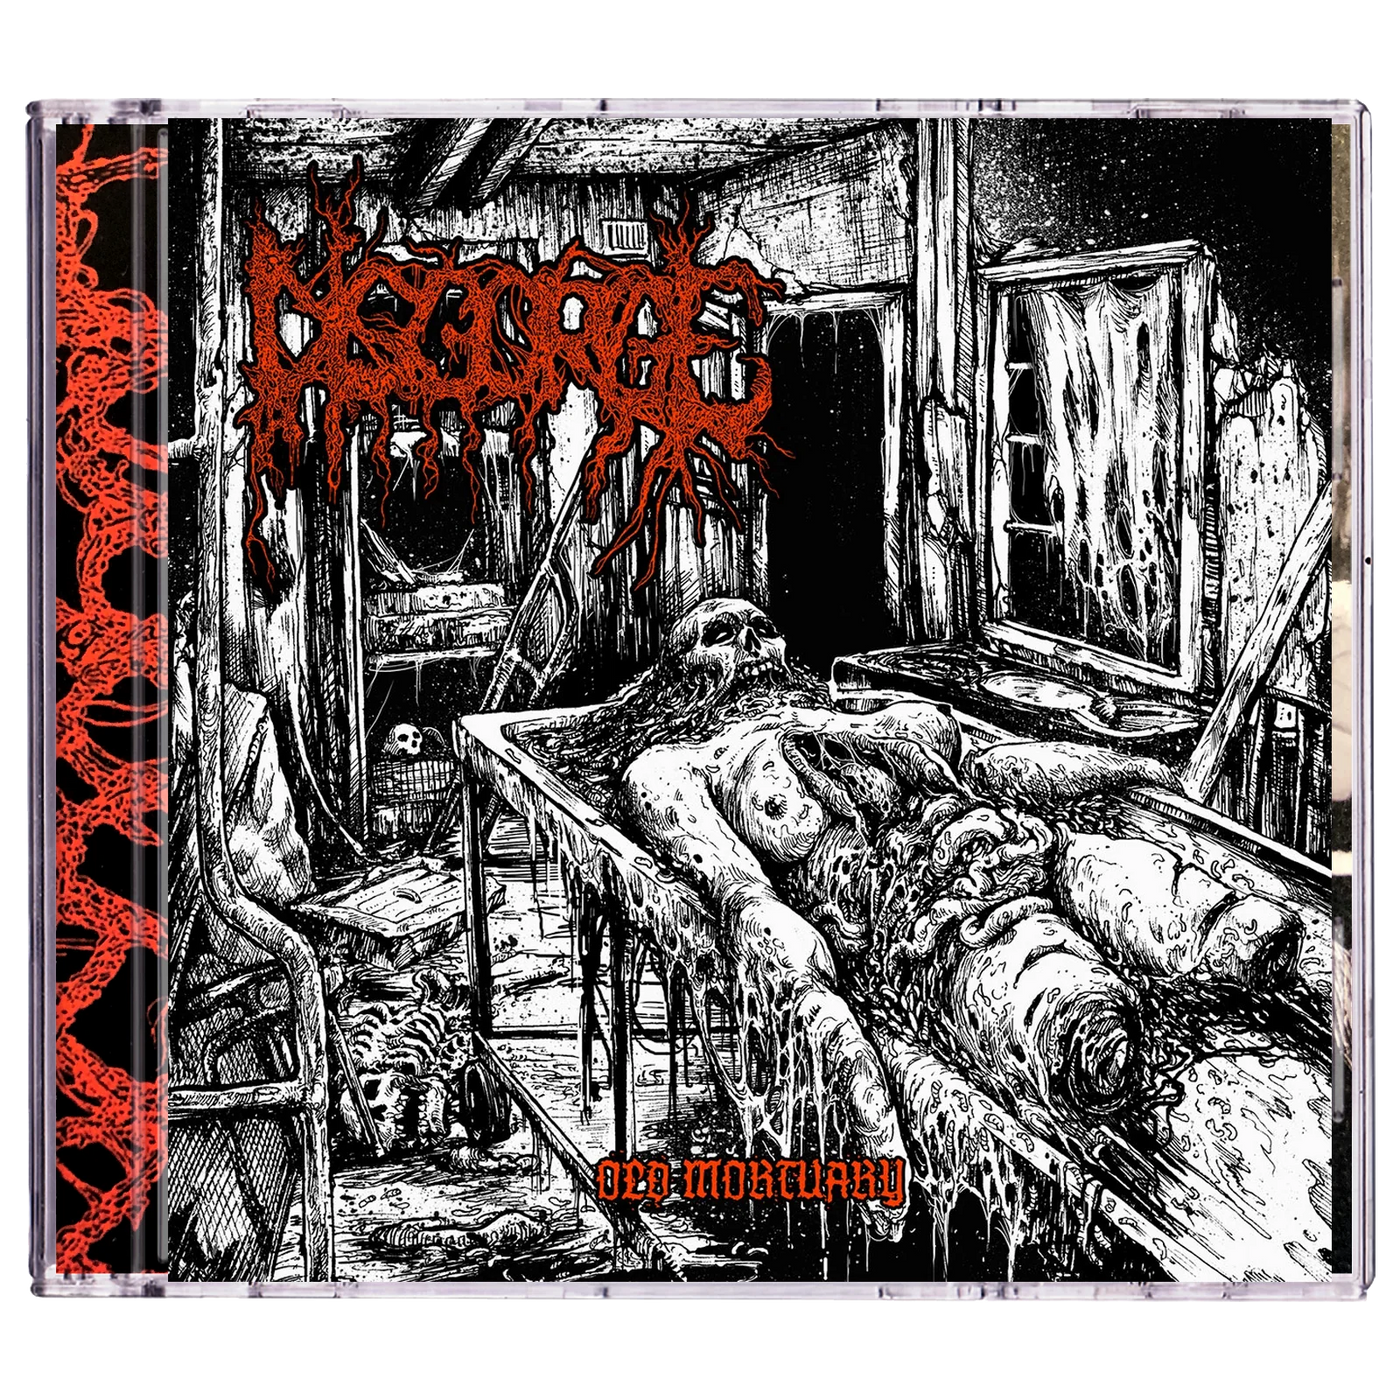 Disgorge 'Old Mortuary' CD